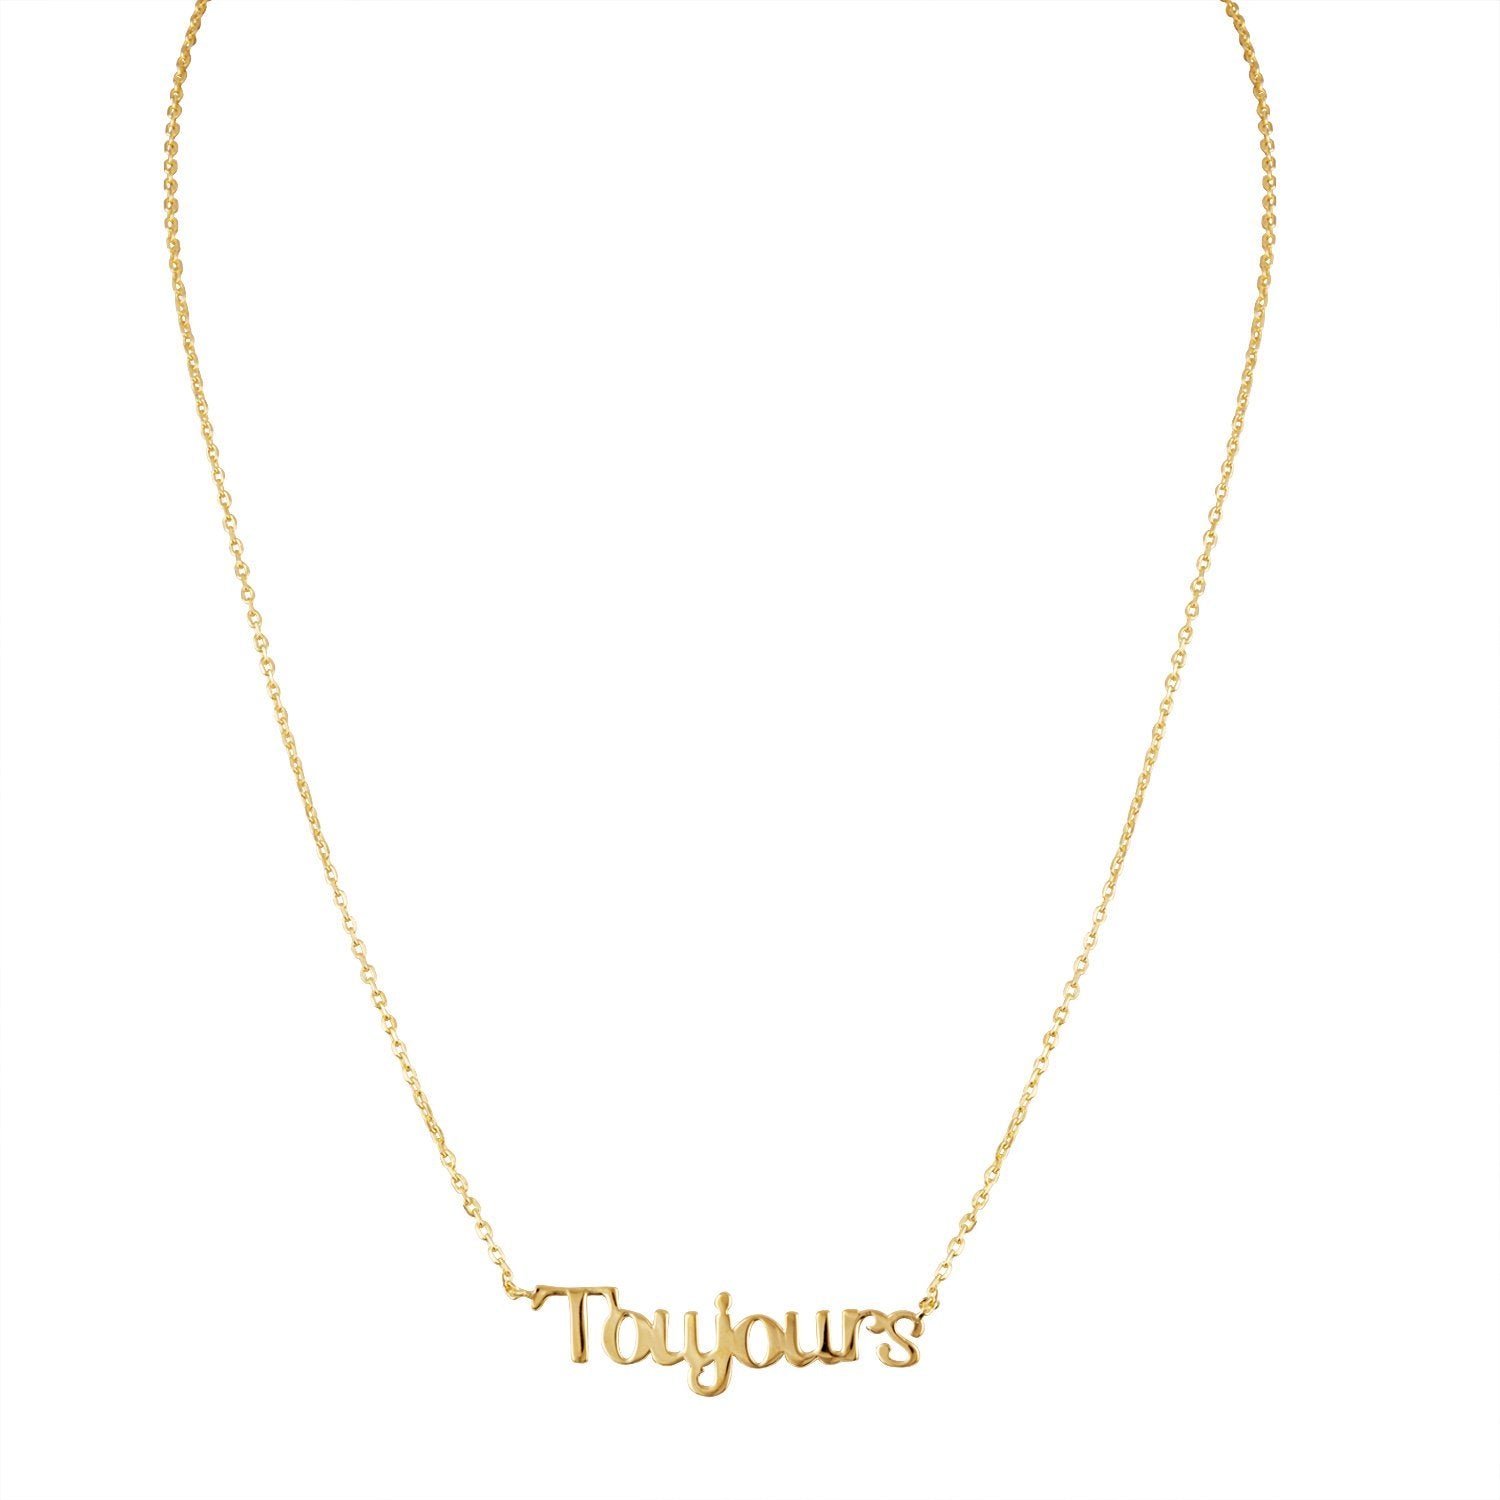 Toujours Necklace in Gold - Machete Jewelry